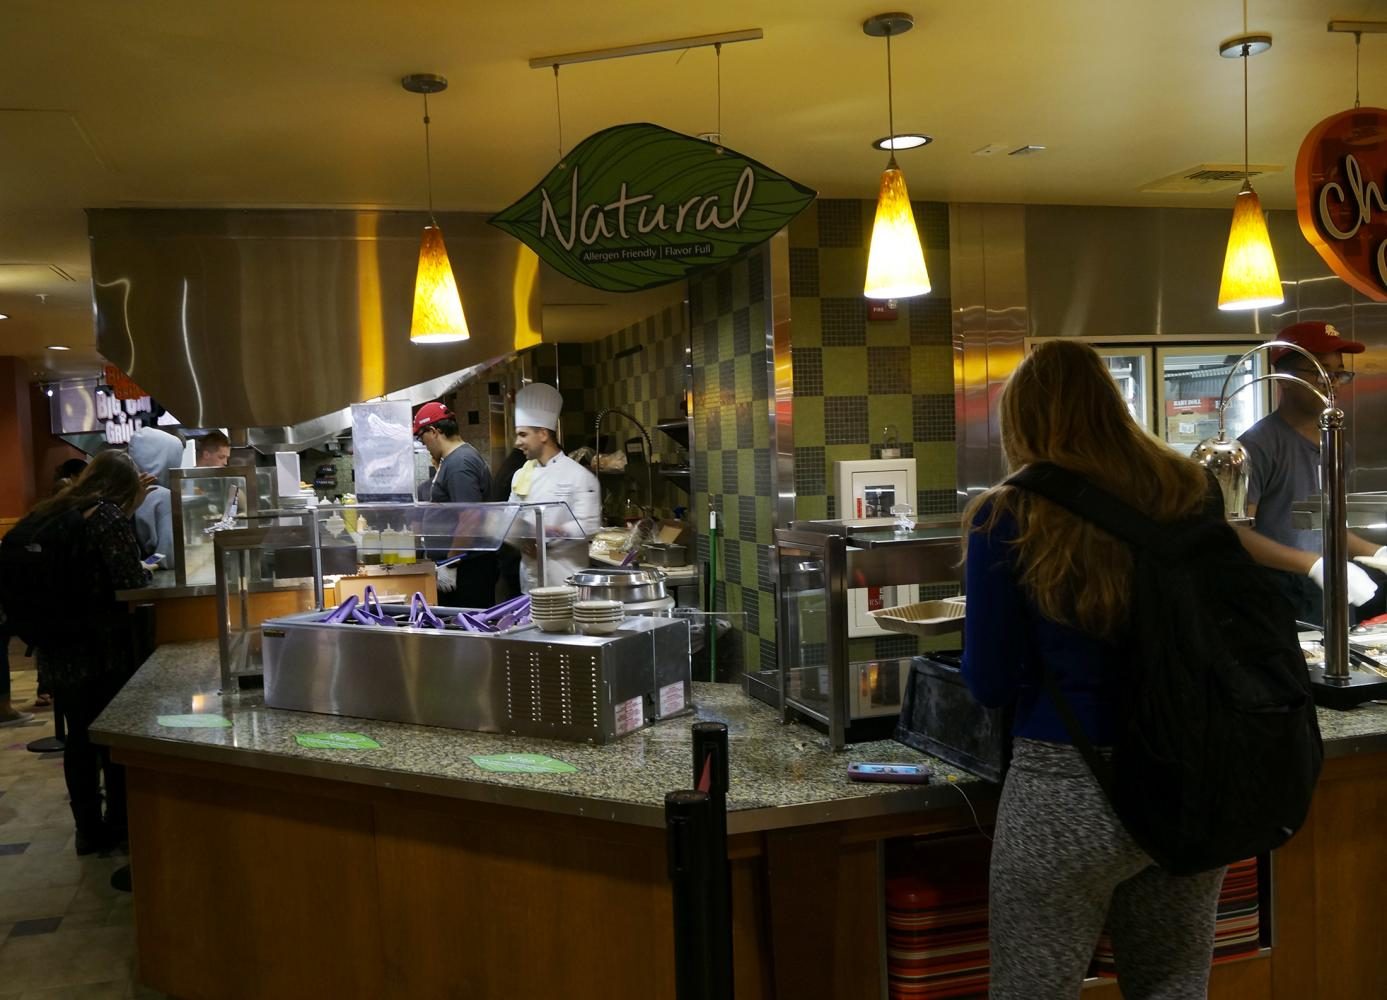 The dining halls label all food with the dietary differences to make choosing meals easy.